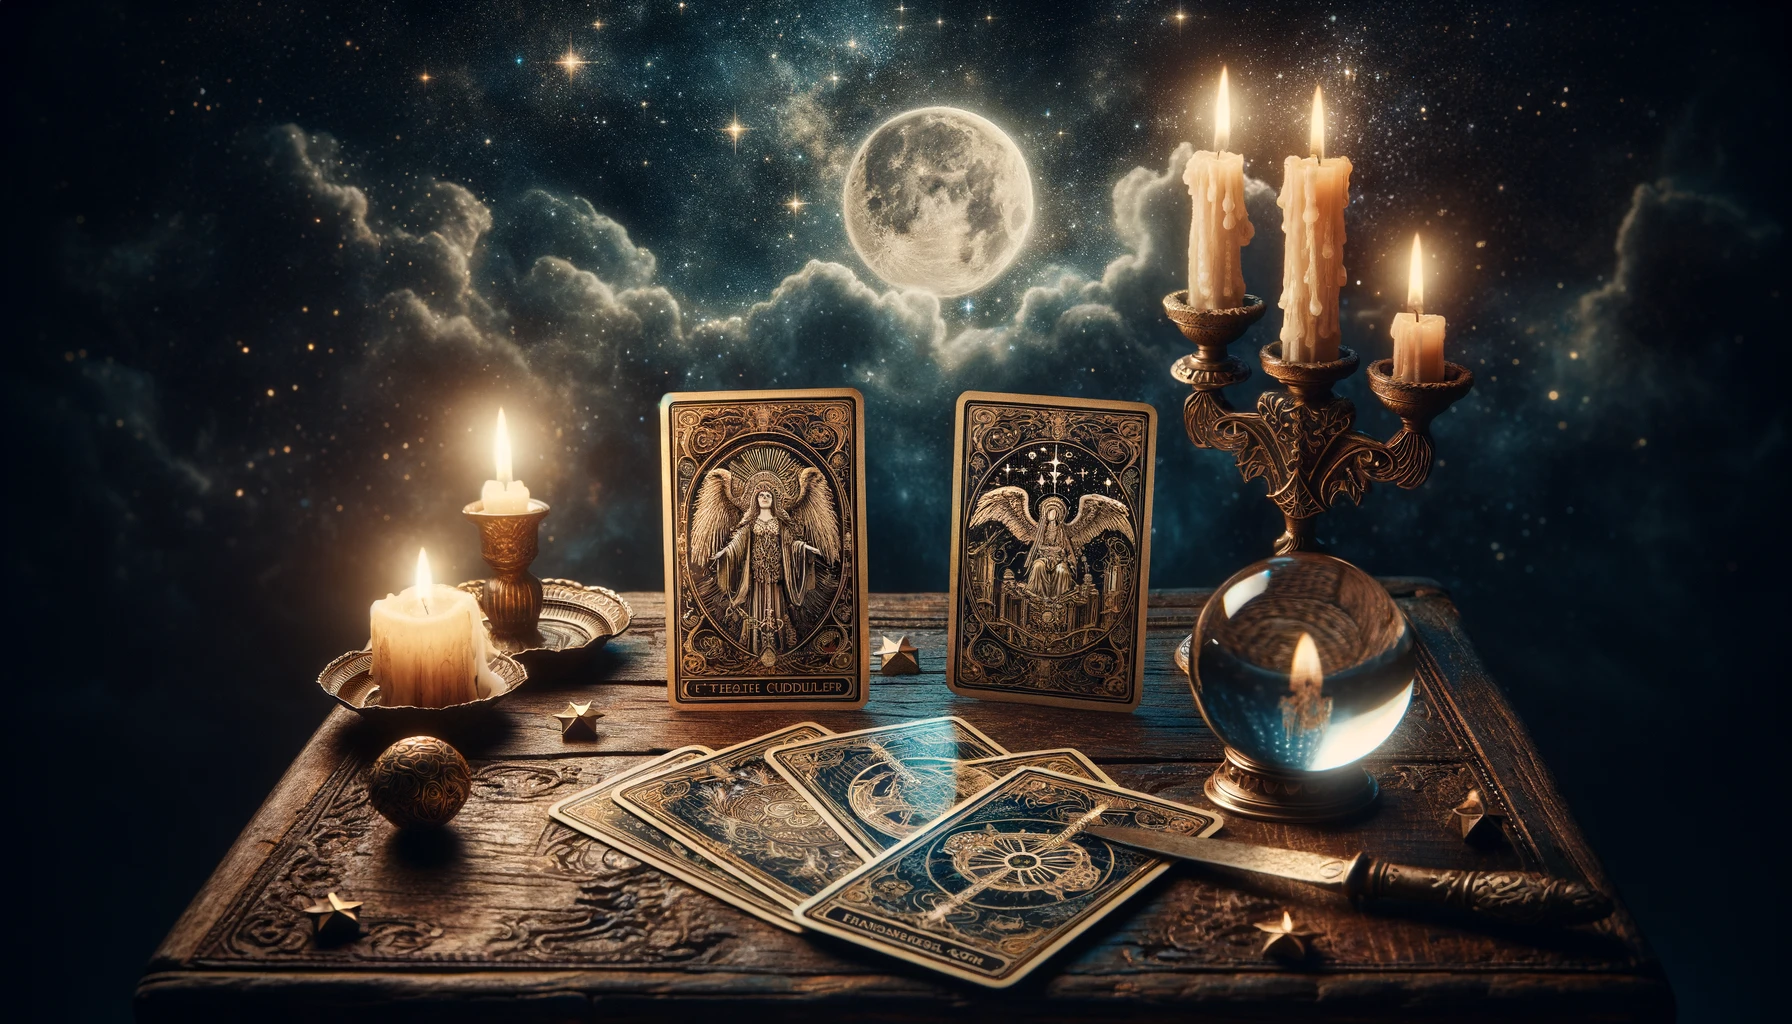 An image of three ornate tarot cards fanned out on a mystical starry background. The scene includes a crystal ball and burning candles placed on an